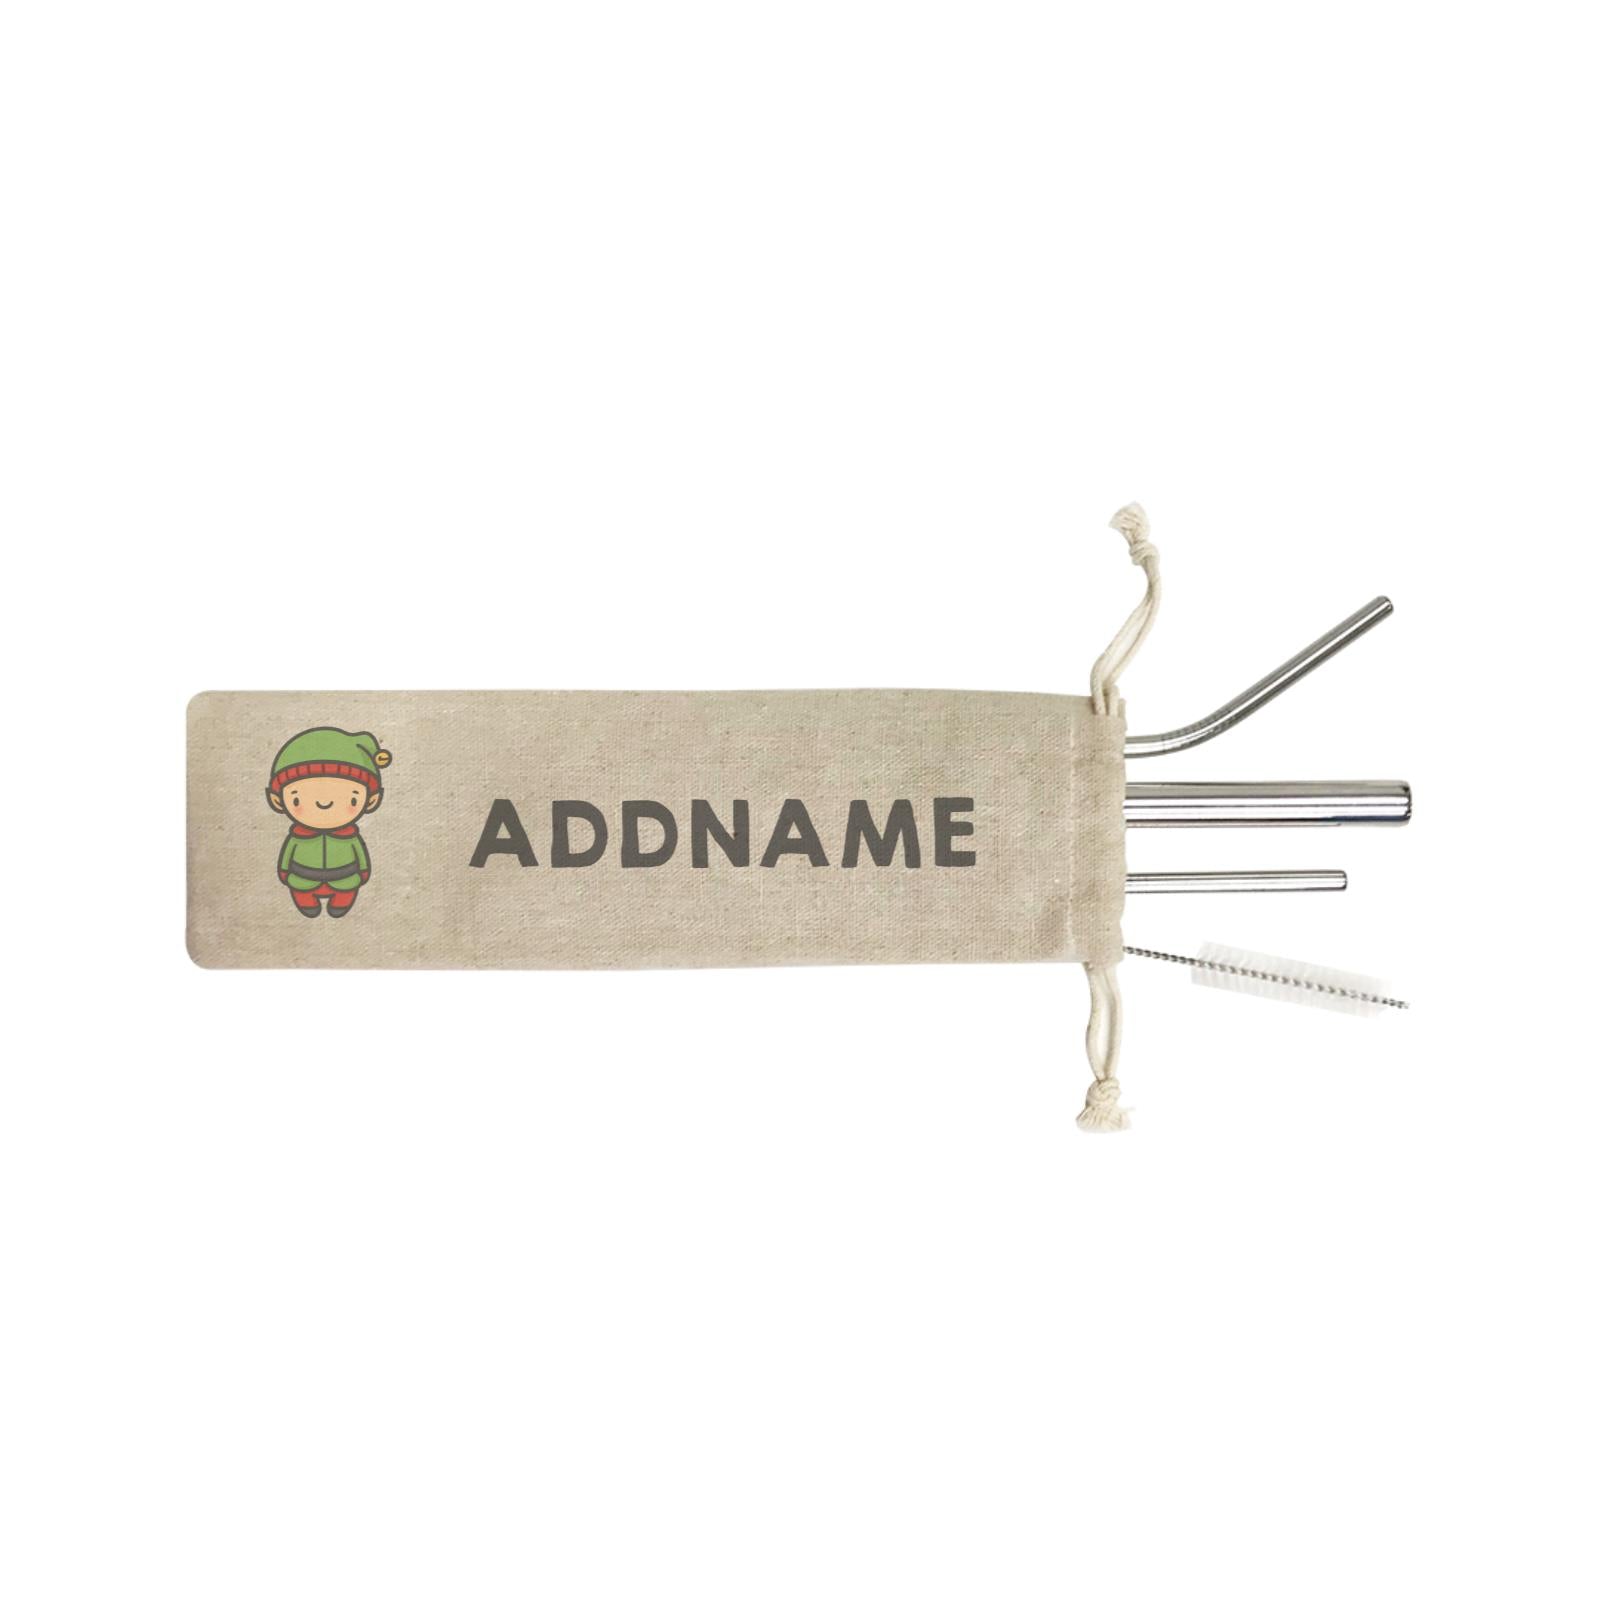 Xmas Cute Elf Addname SB 4-in-1 Stainless Steel Straw Set In a Satchel